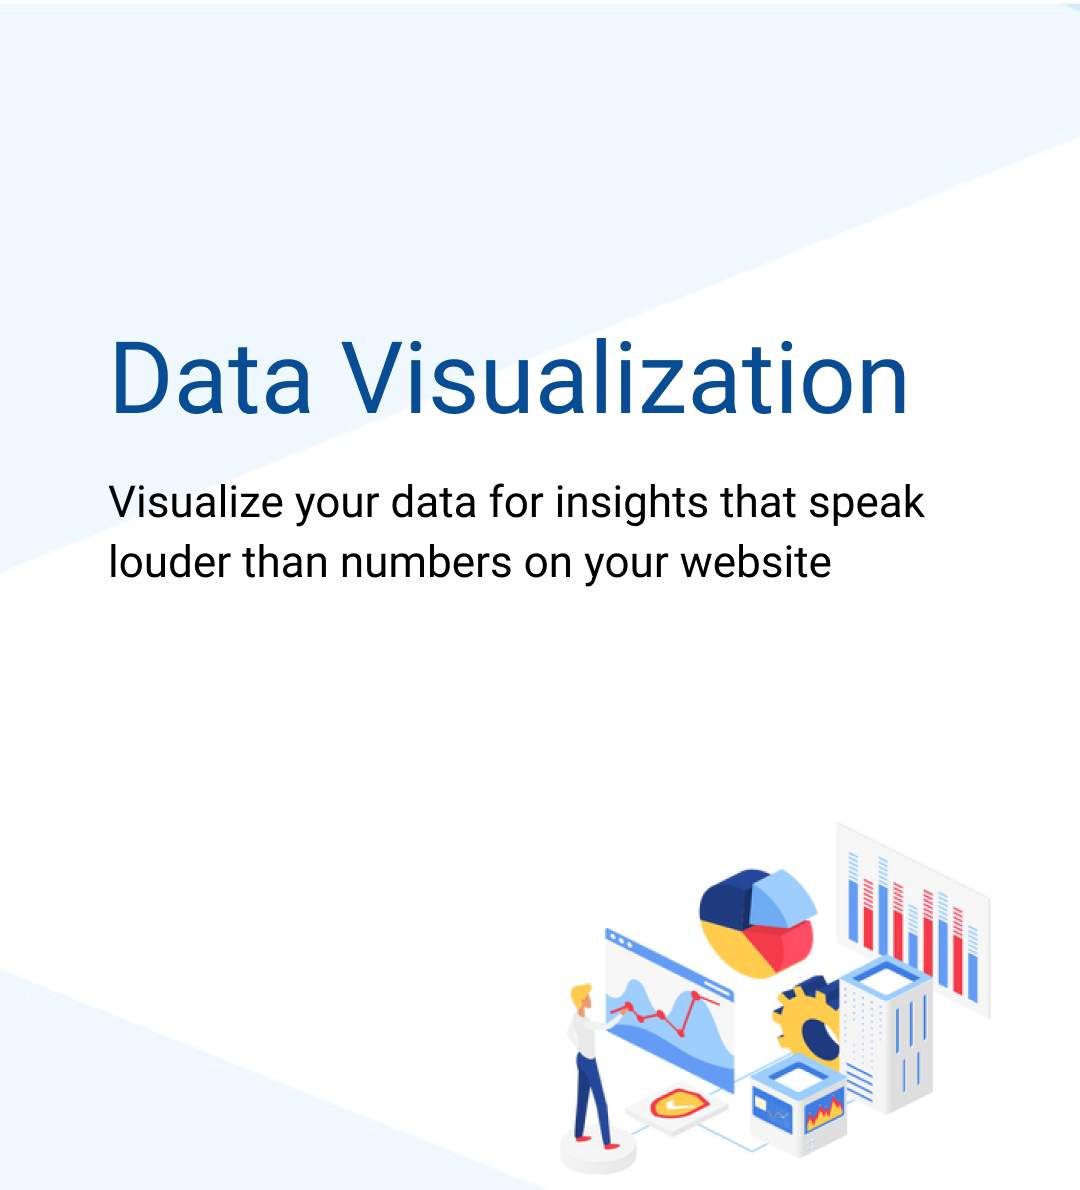 Visualize your data for insights that speak louder than numbers on your website